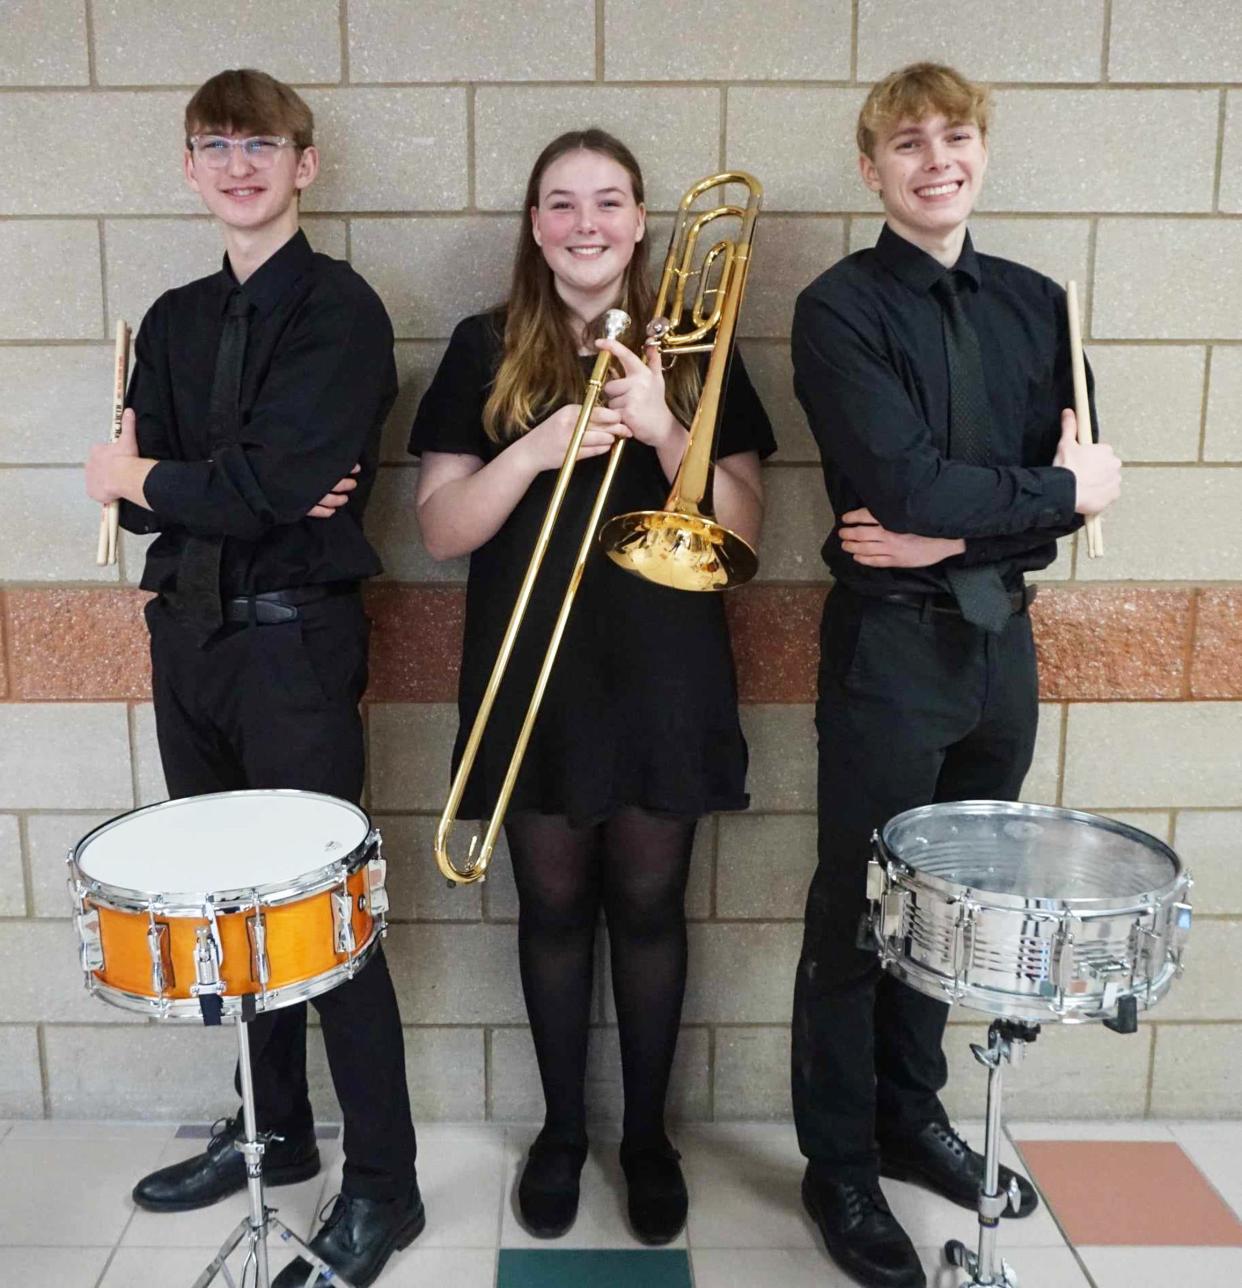 Ellsworth students Calista Hoeksema, Patrick Puroll and Jürgen Griswold auditioned and landed a spot in this year’s Lions of Michigan All-State Band.